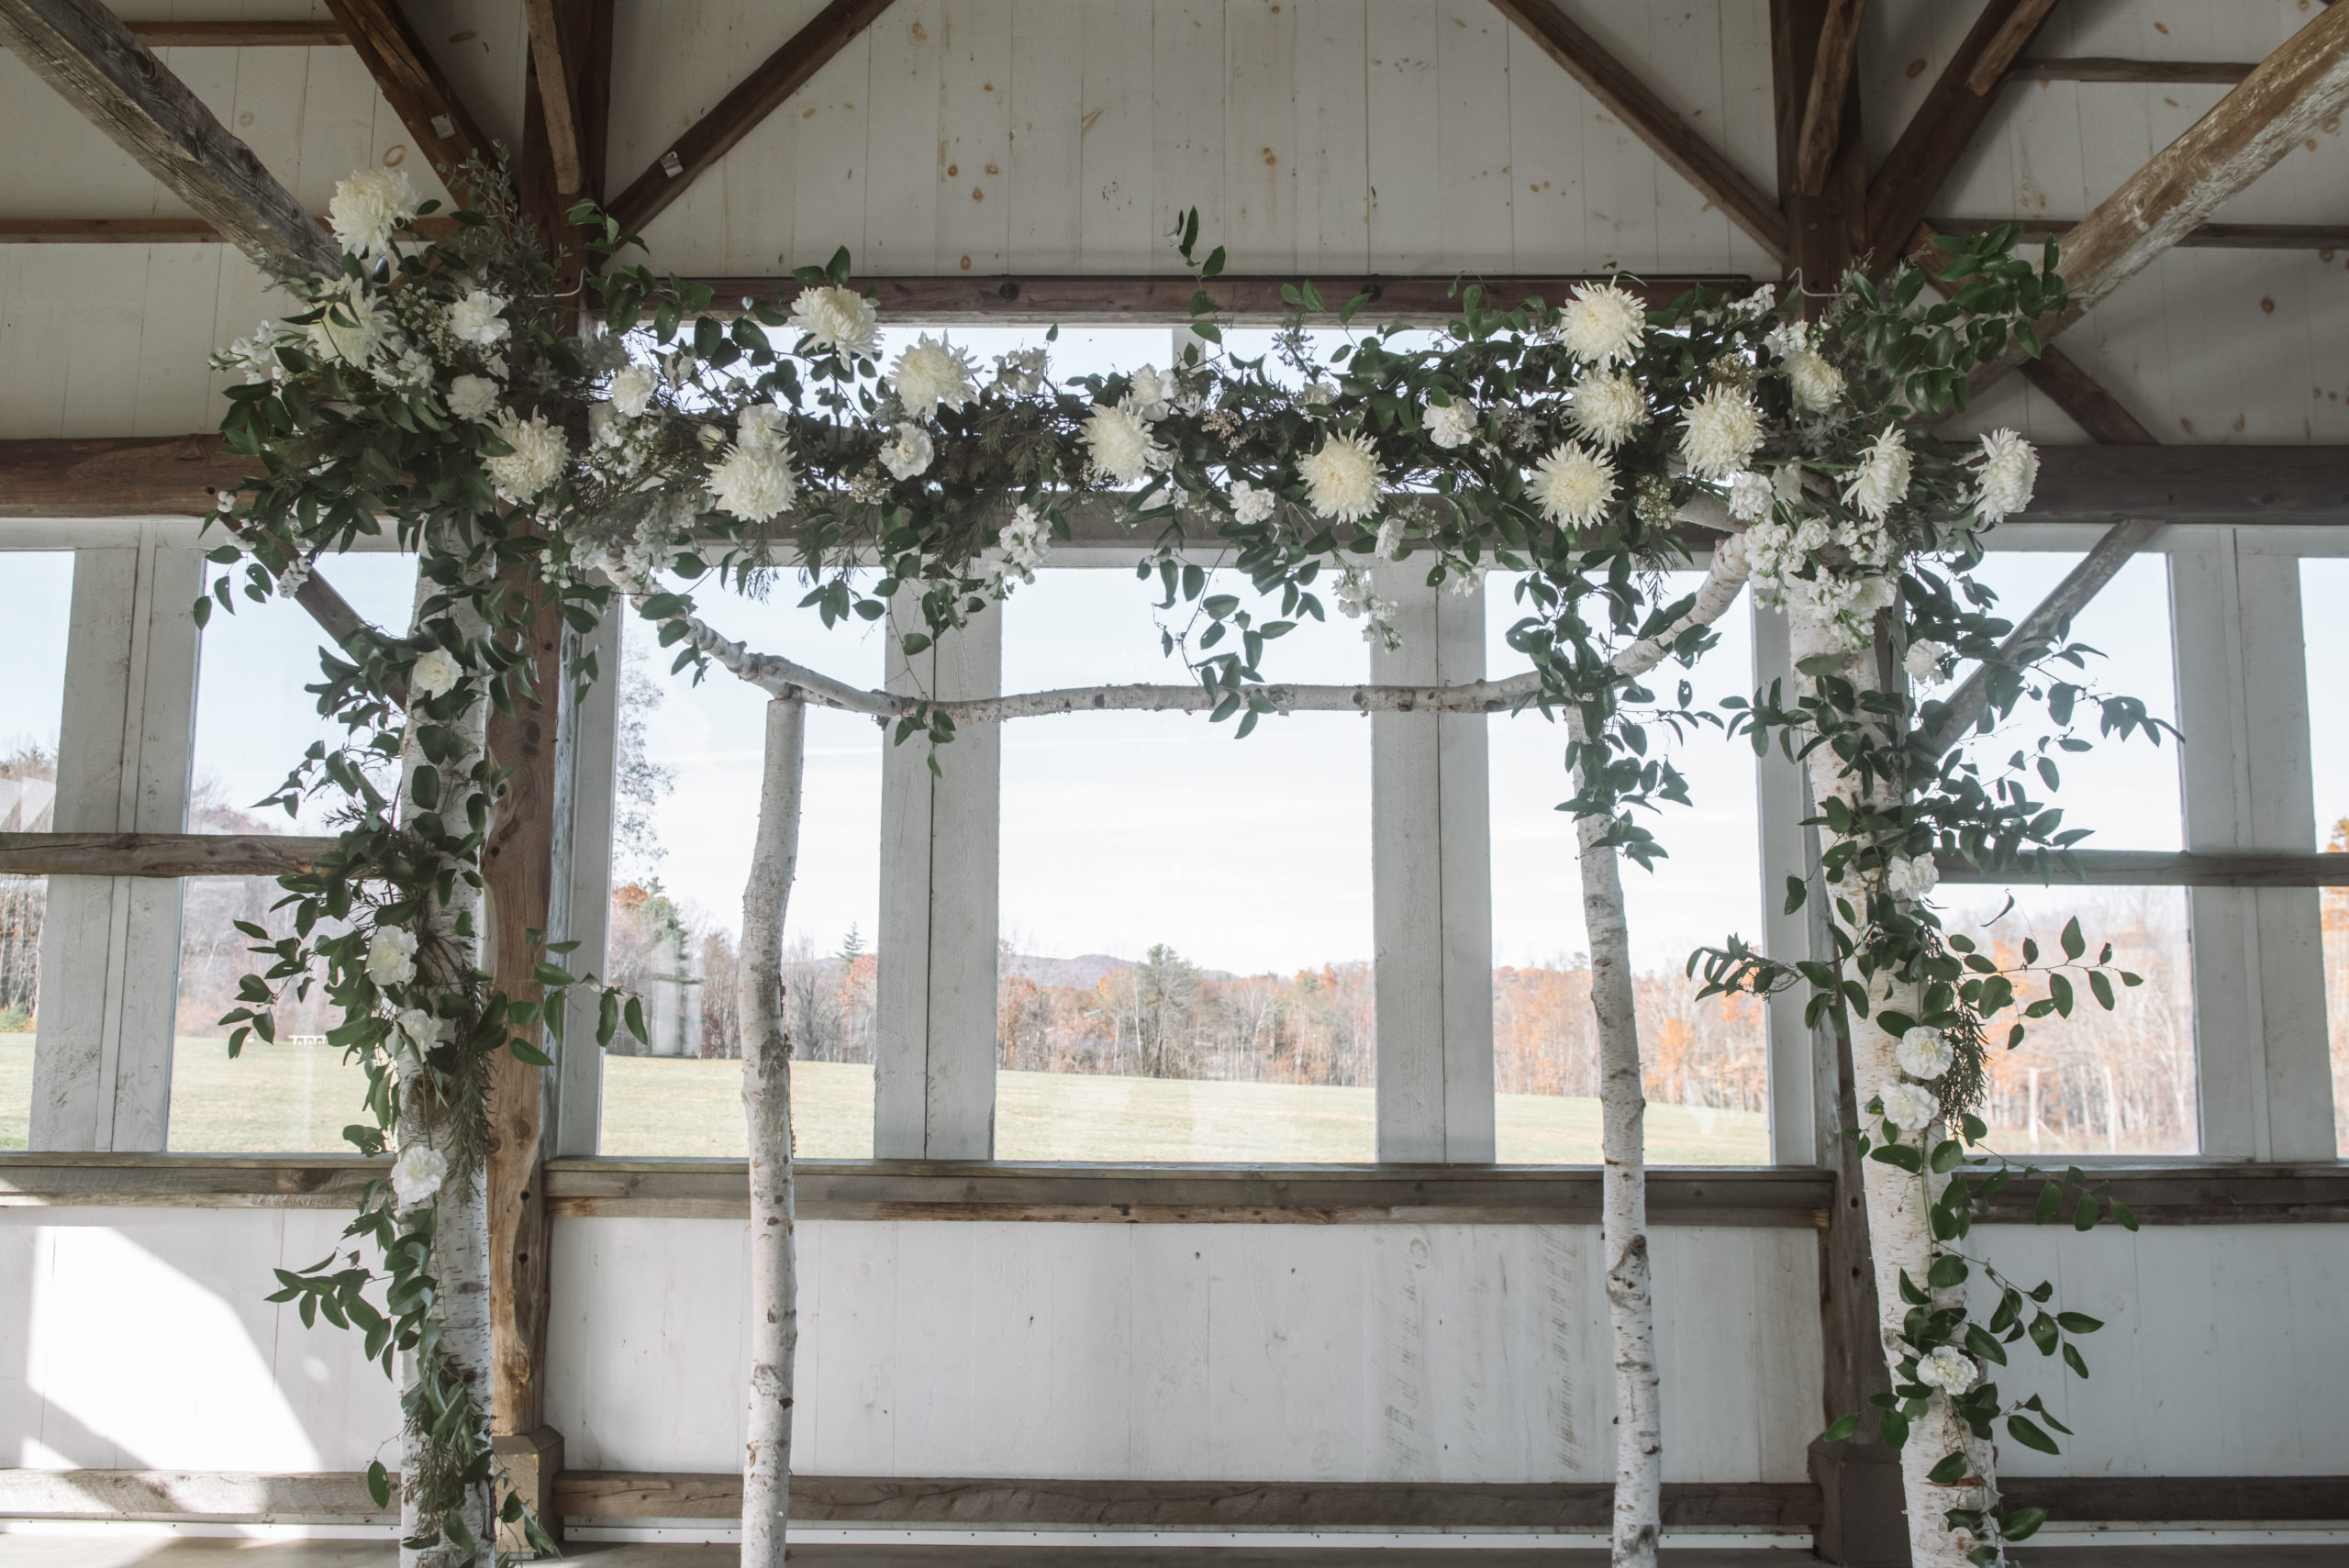 An alter in a ceremony location that is decorated with birch trees, greenery, and white florals. There are wooden beams in the location. There are windows behind showing an autumnal forest in the background.